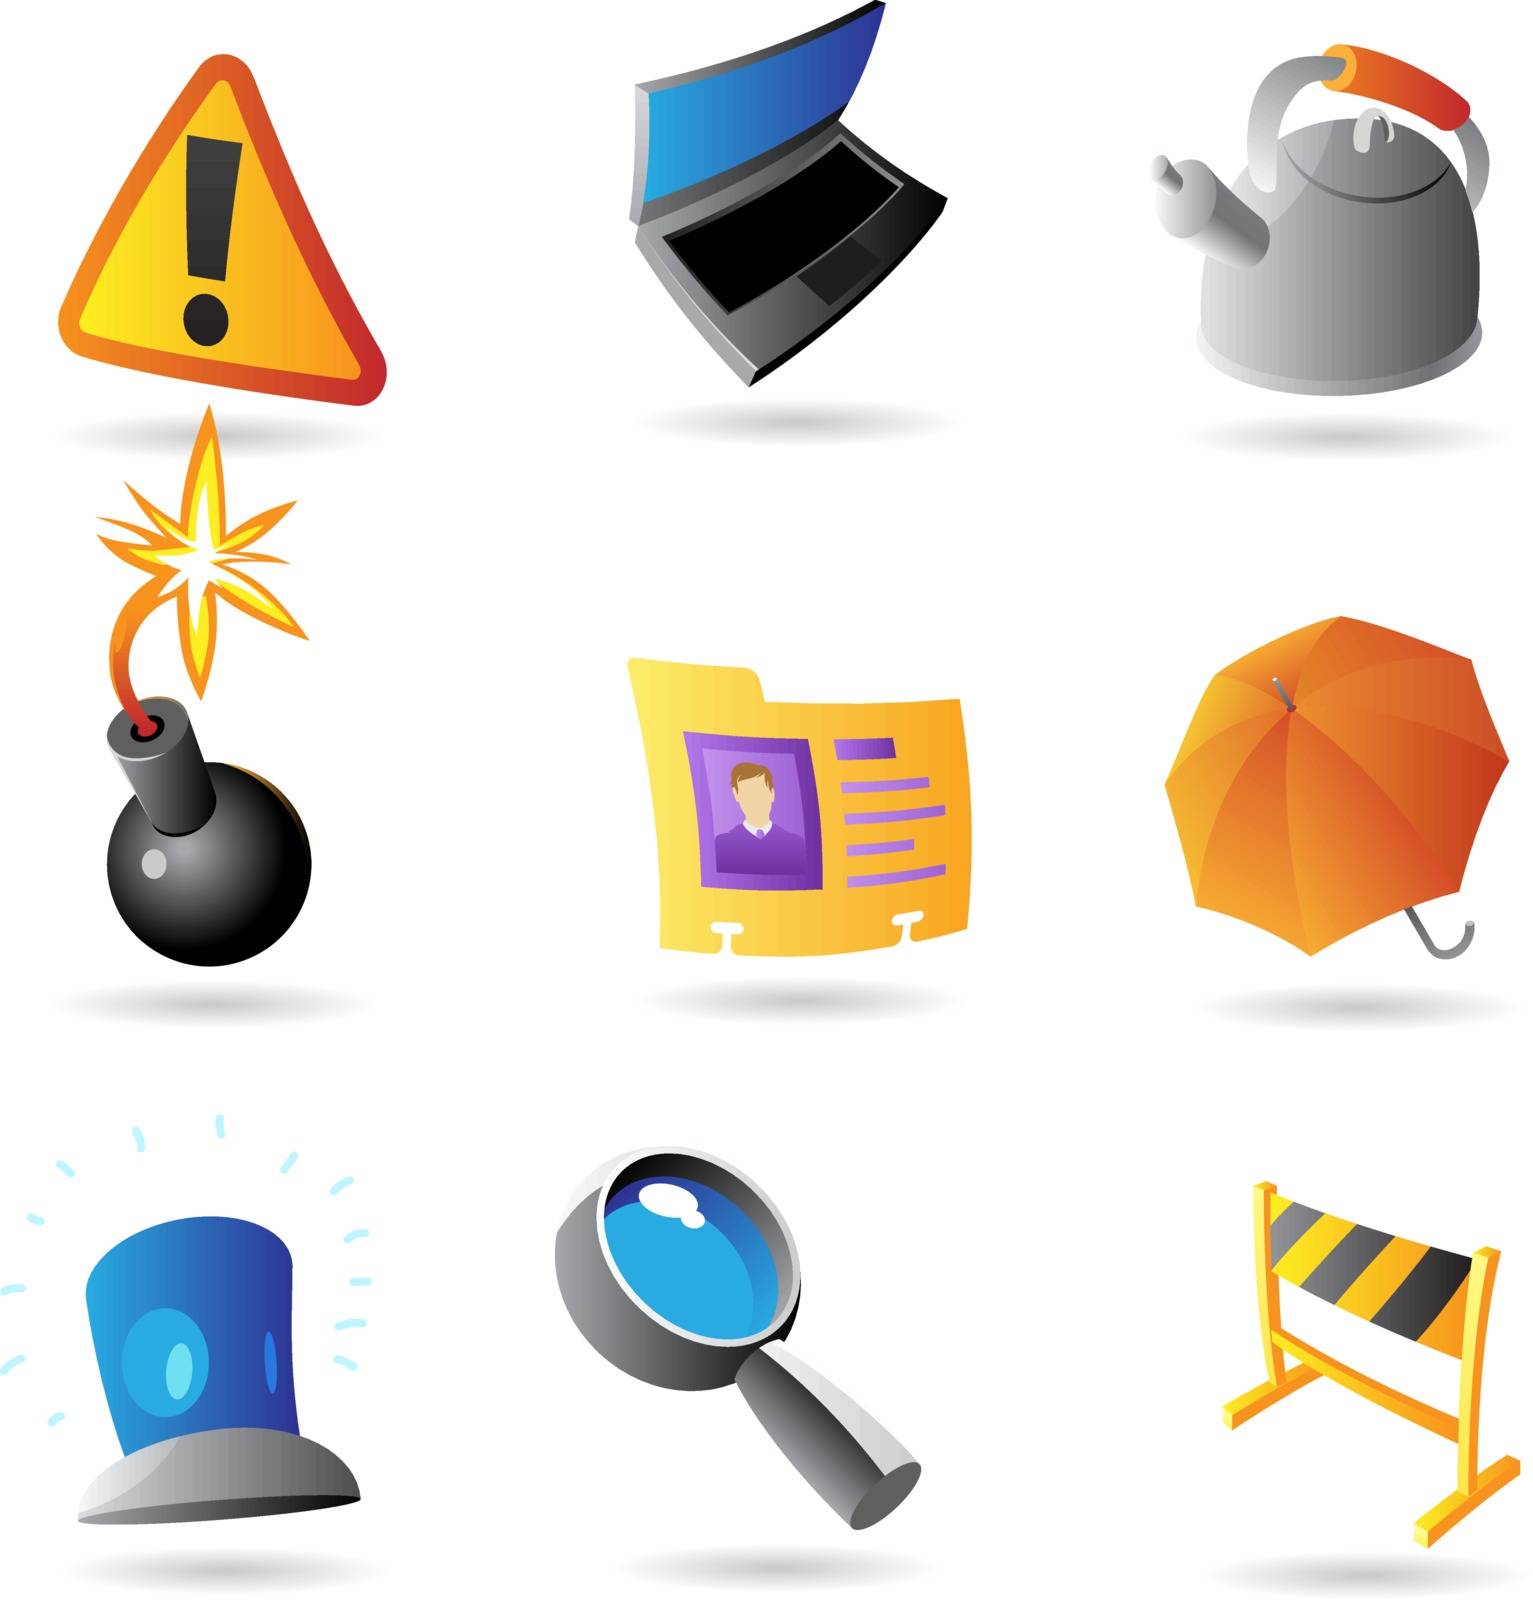 Icons for program interface. Vector illustration.